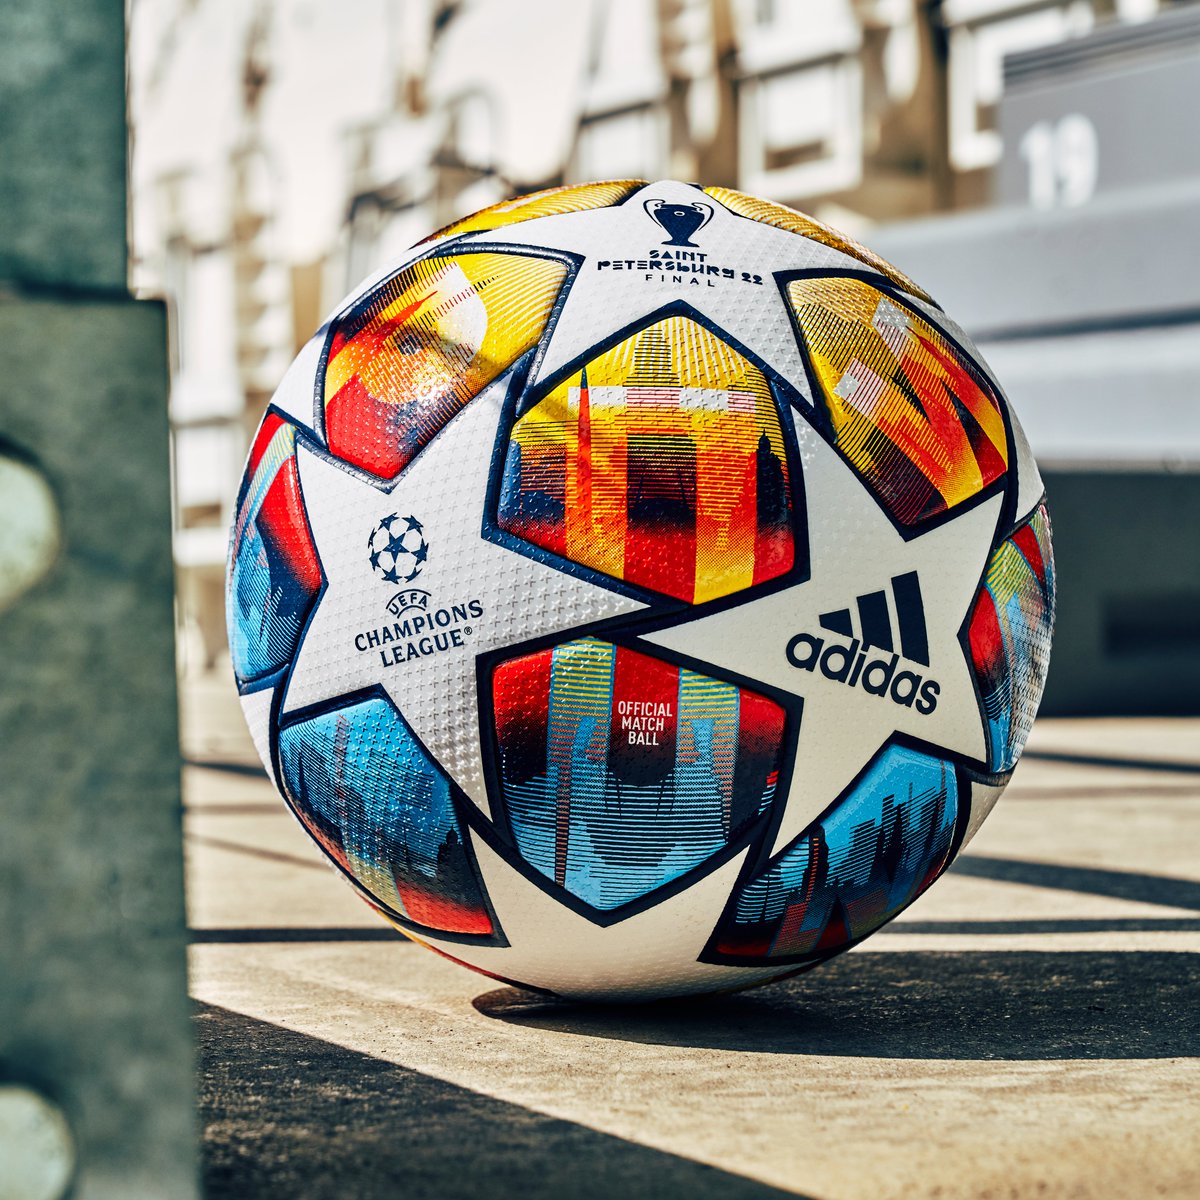 Før Ulv i fåretøj charme adidas Football on Twitter: "RT @ChampionsLeague: Where new stories start ✨  Introducing the official @adidasfootball match ball for the 2021/22  knockout stage! 🤩 Insp…" / X